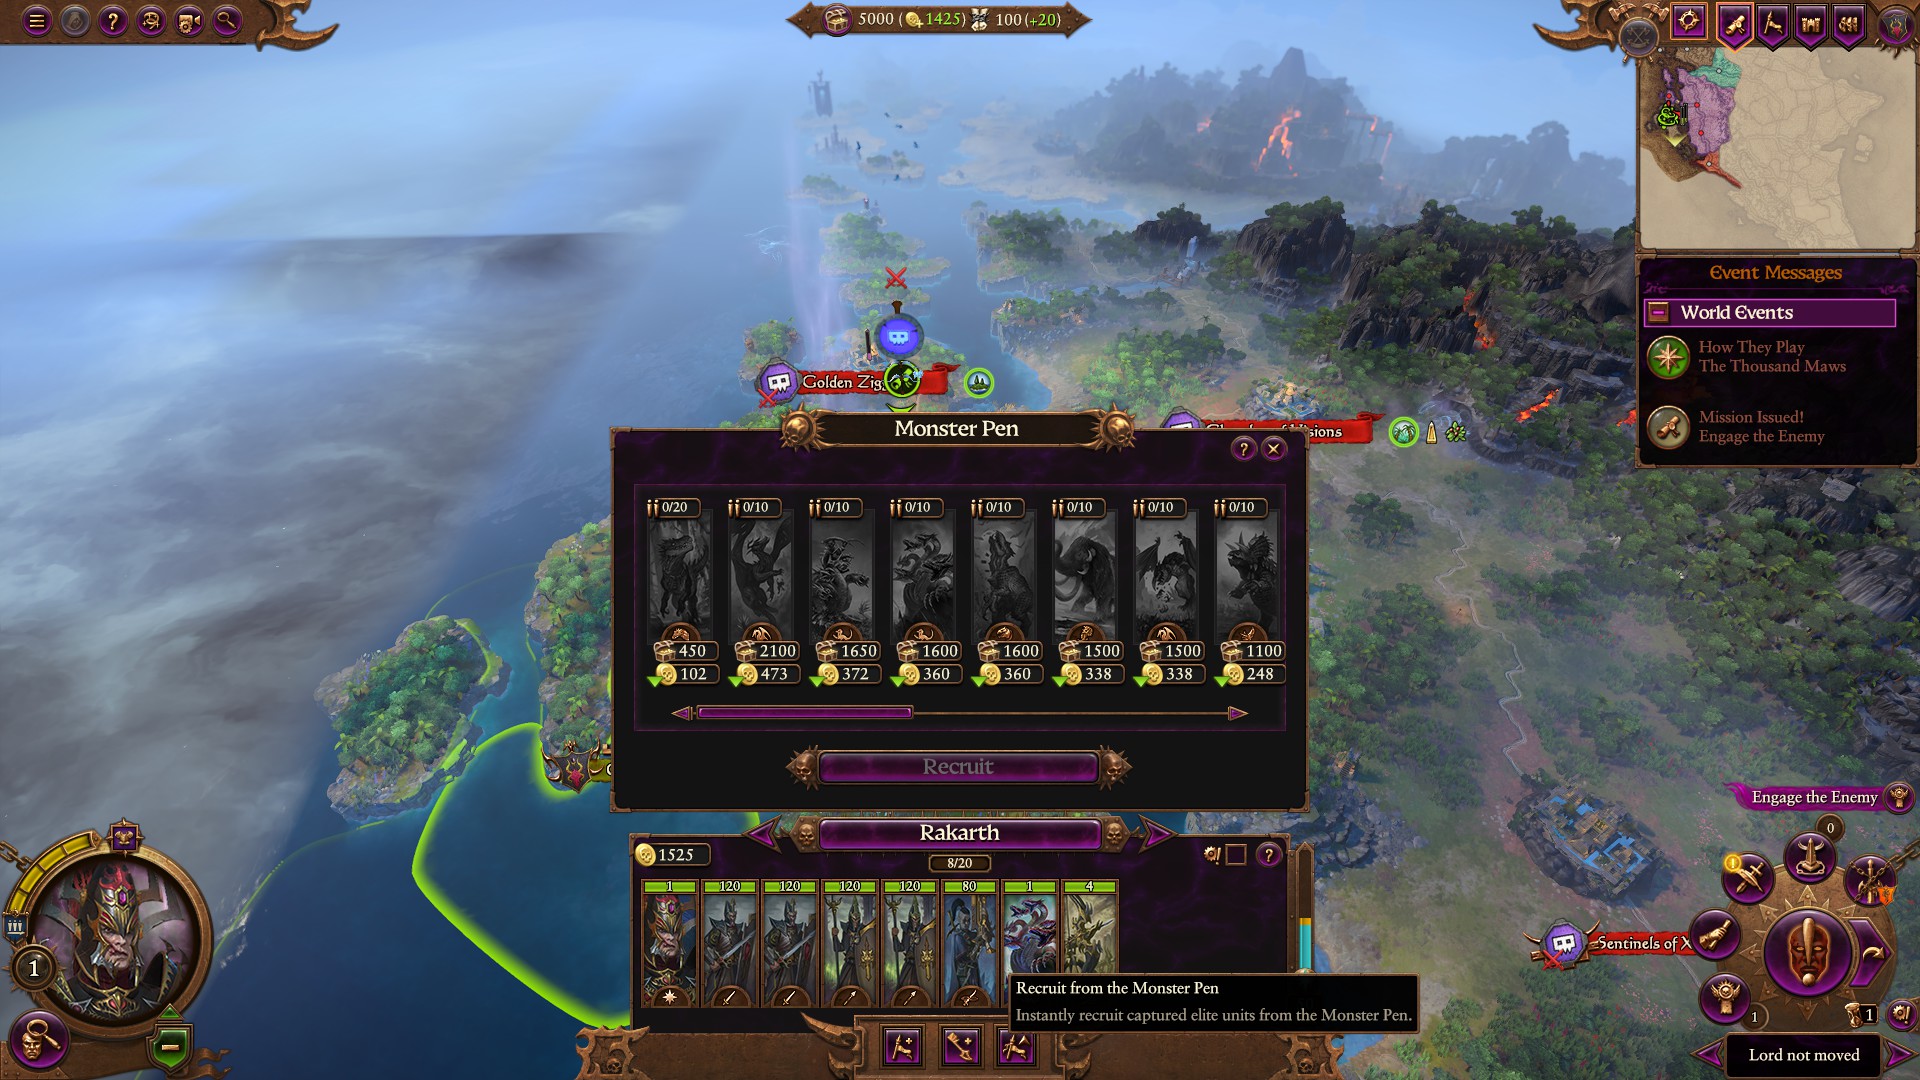 Total War: Warhammer 3 Immortal Empires Rakarth - Dark Elves campaign overview, guide and second thoughts image 7